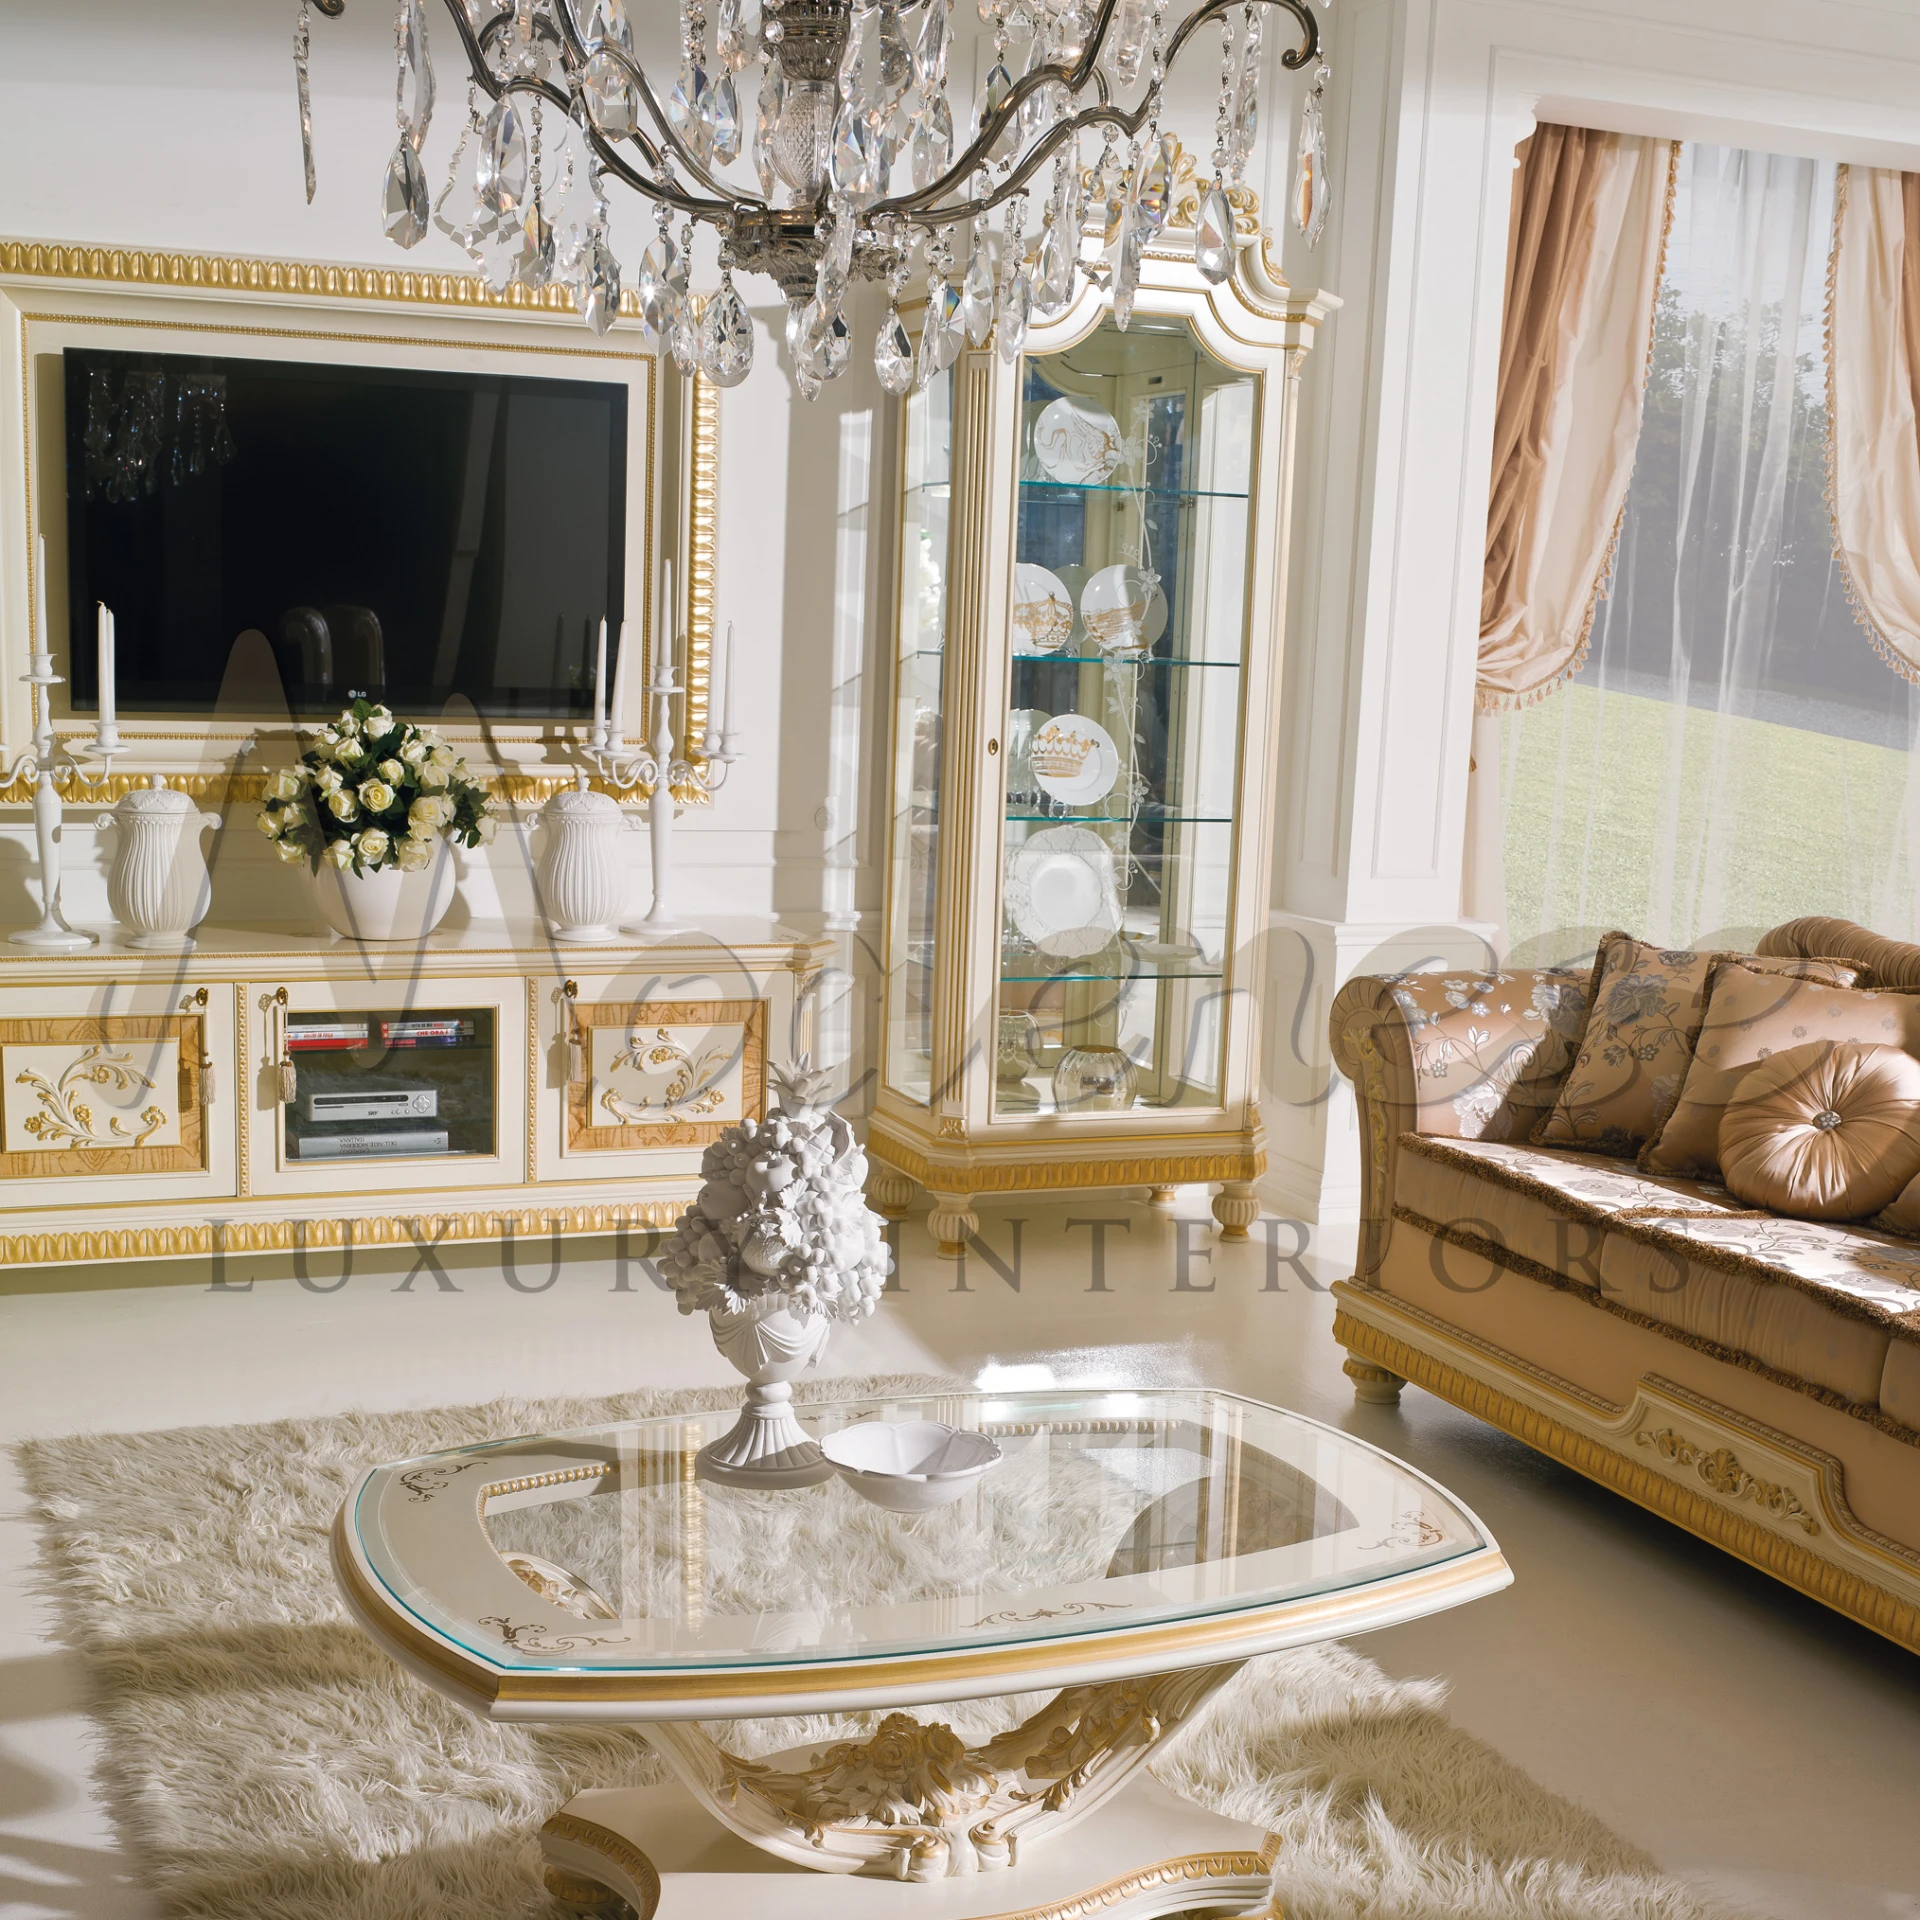 A room with a shiny chandelier, fancy chairs,ivory style cabinet, side table and lots of pretty things.